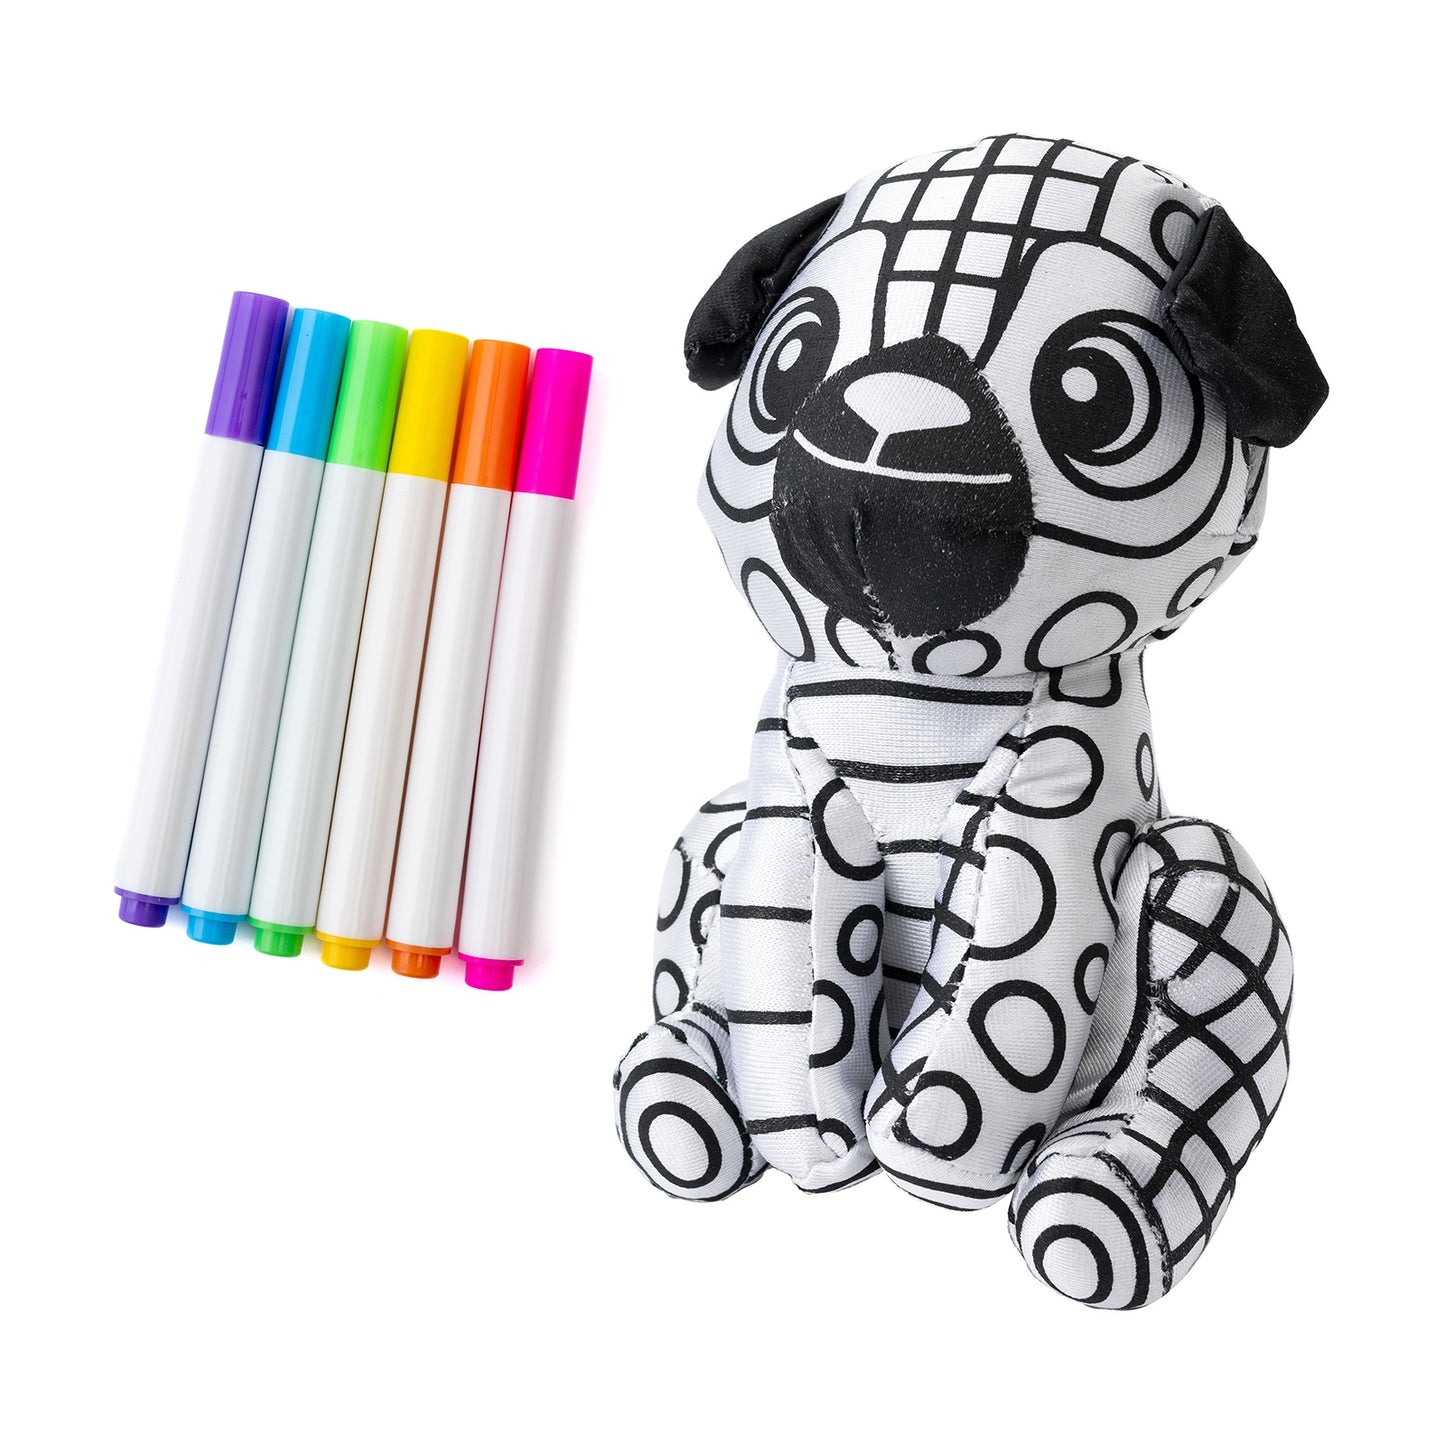 Colorbok Make It Colorful! Color Your Own Plush-Puppy